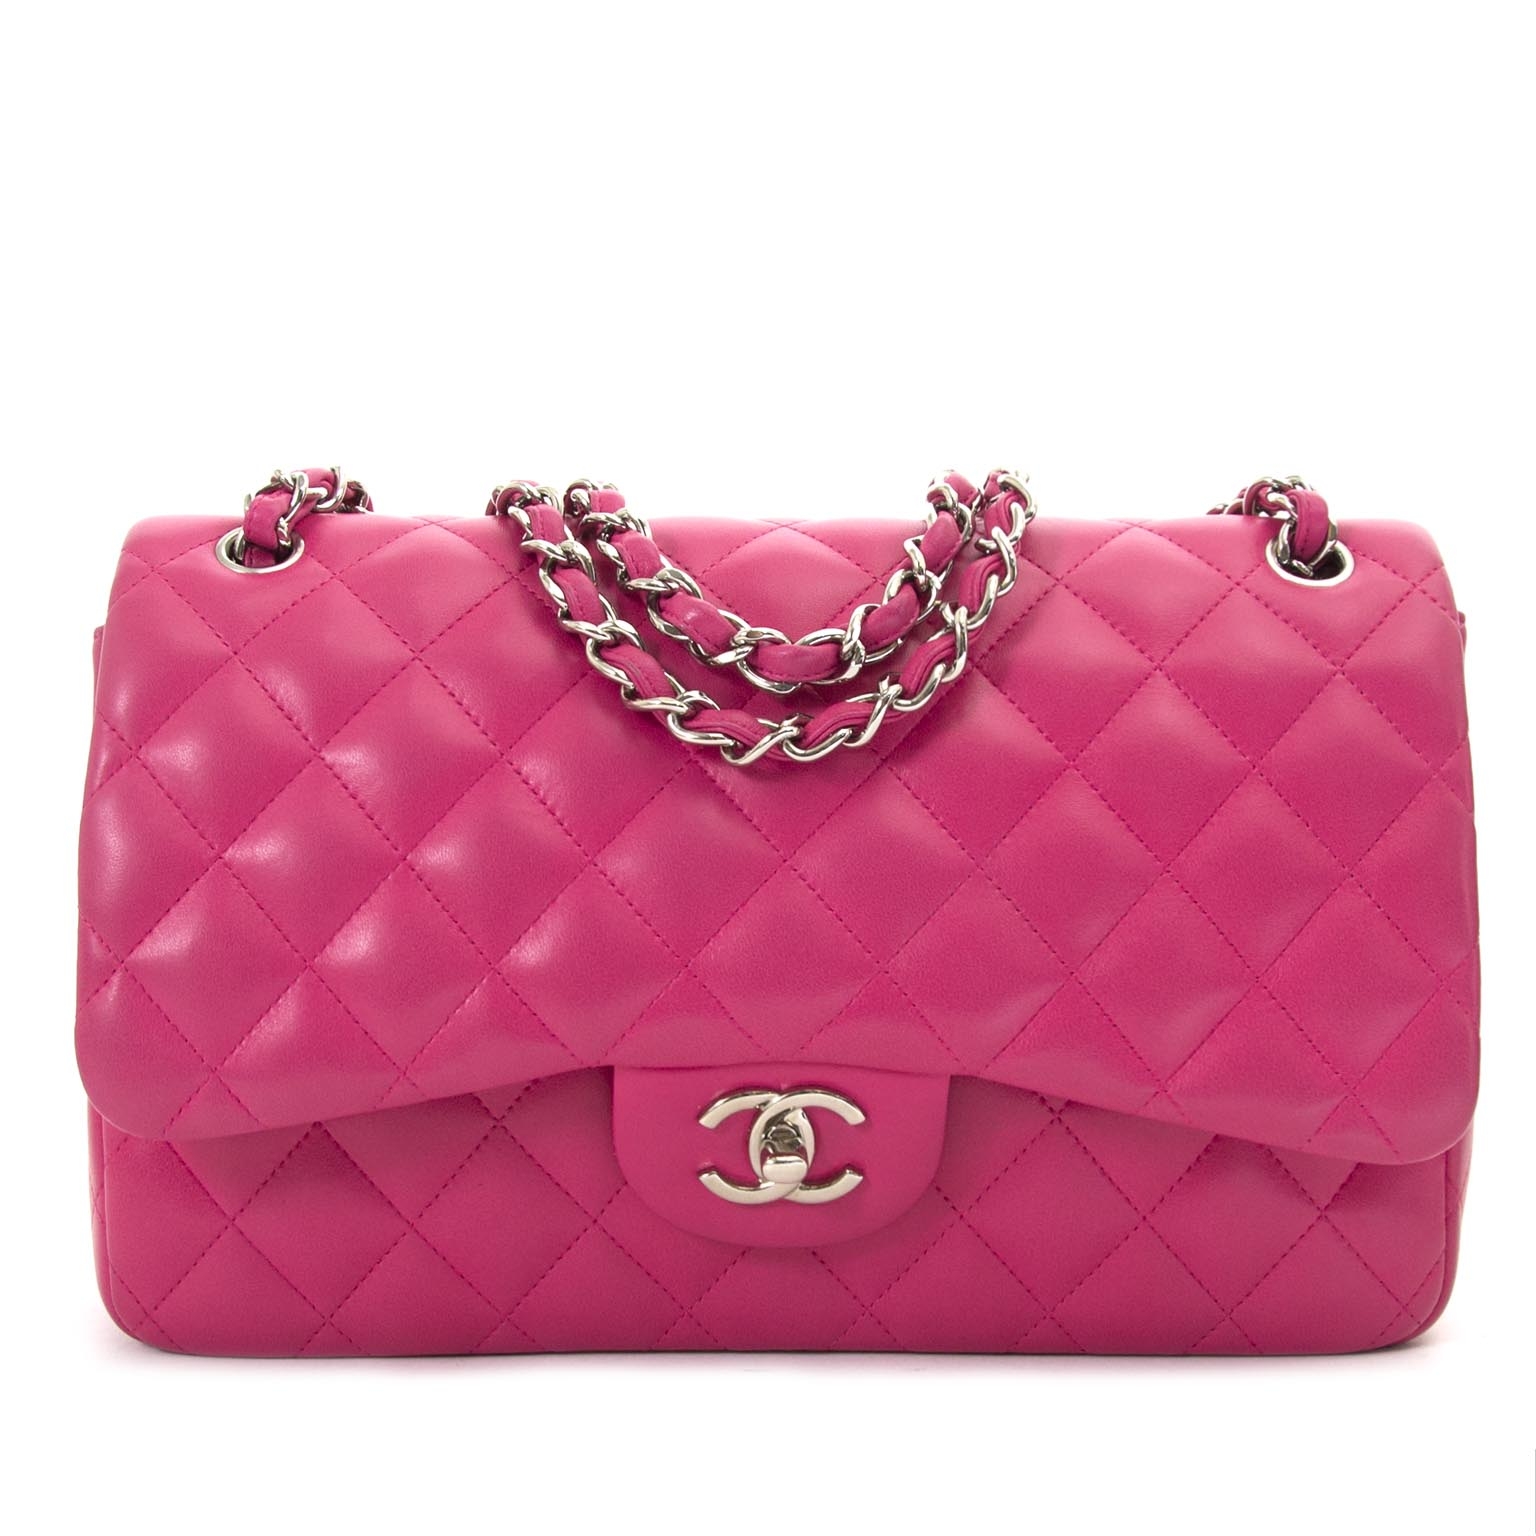 Chanel Spring Summer 2020 Classic Bag Collection Act 2